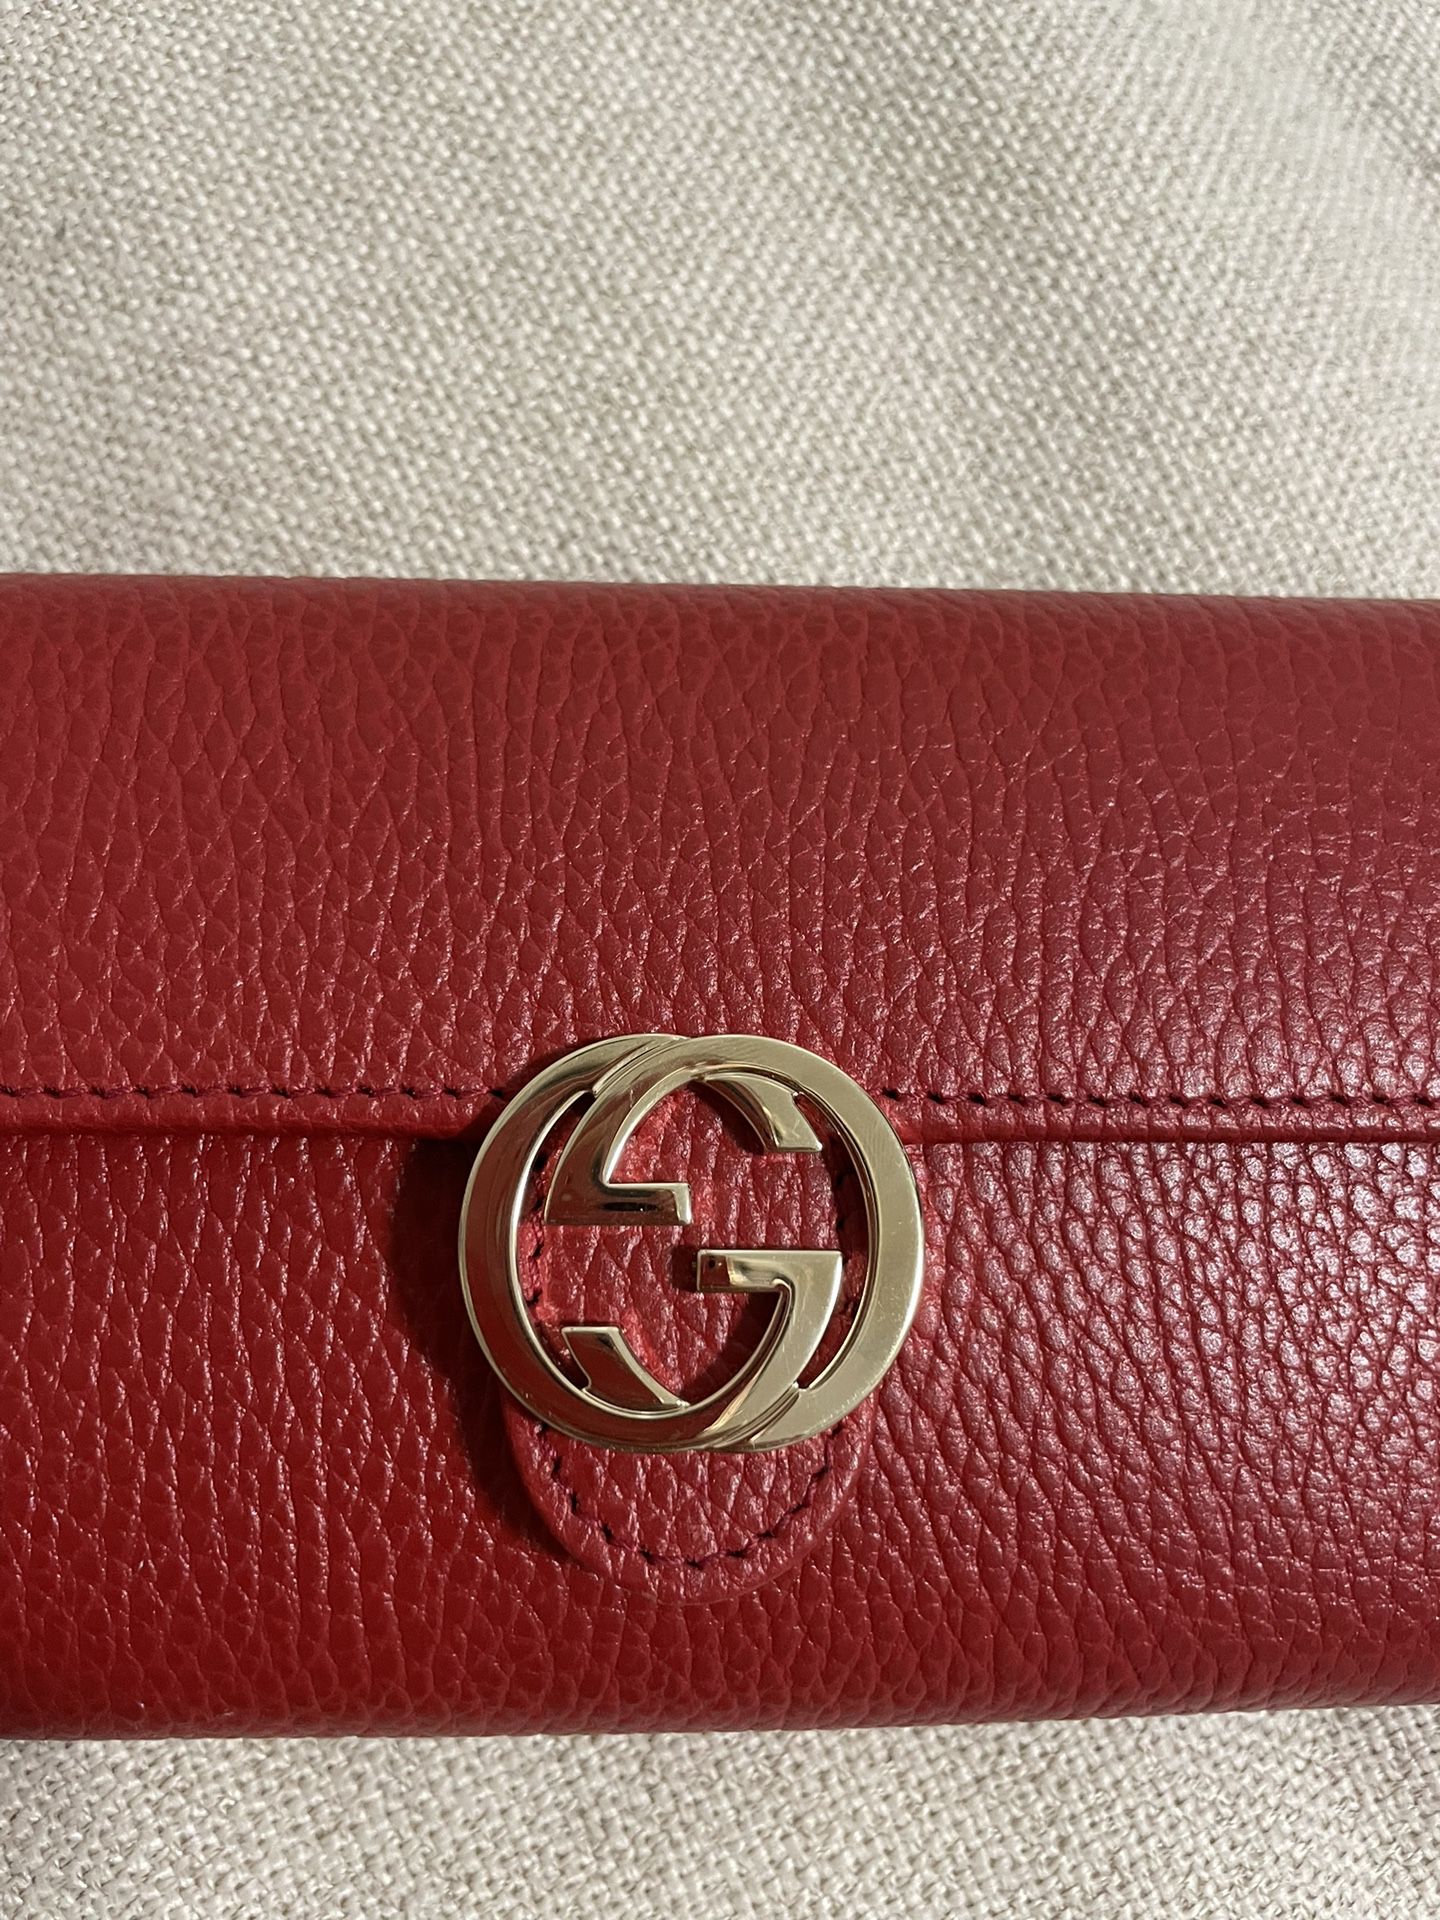 Gucci, Bags, Authentic Gucci Wallet